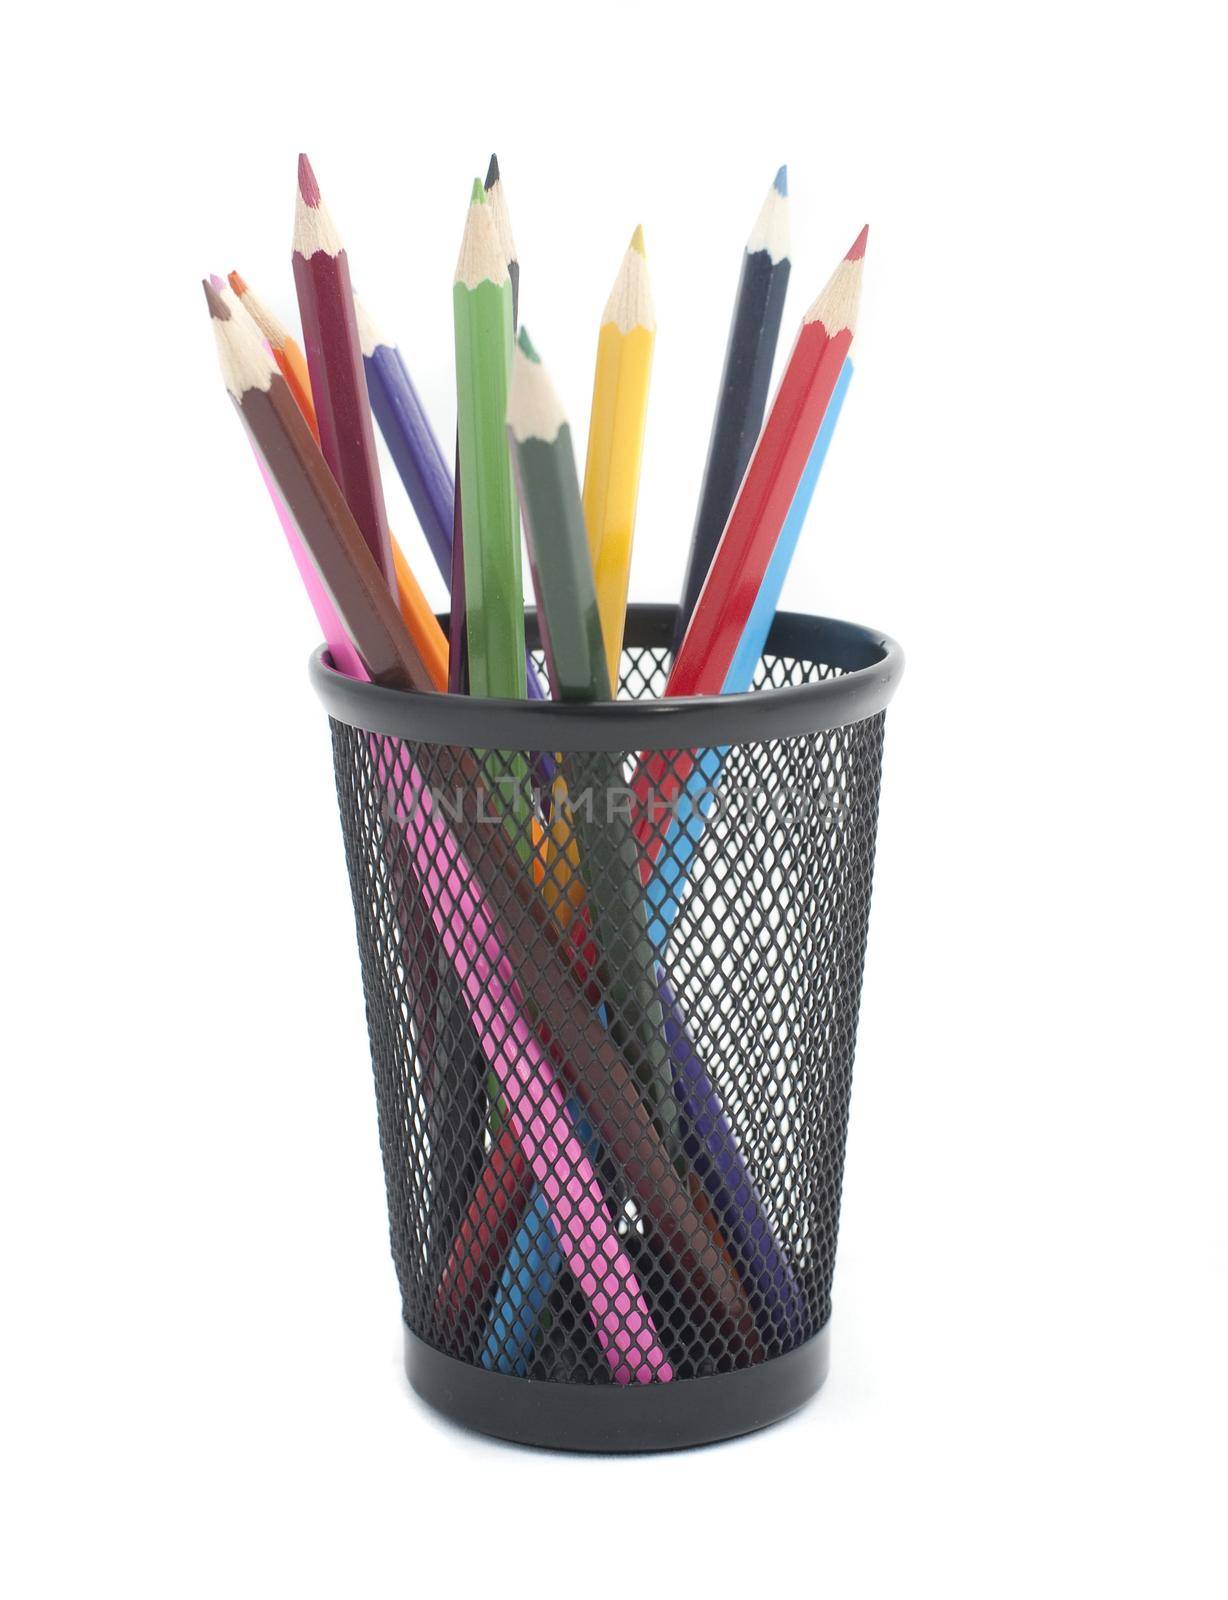 Colouring pencils in a metal container desk tidy ready for colouring in, drawing or handicraft